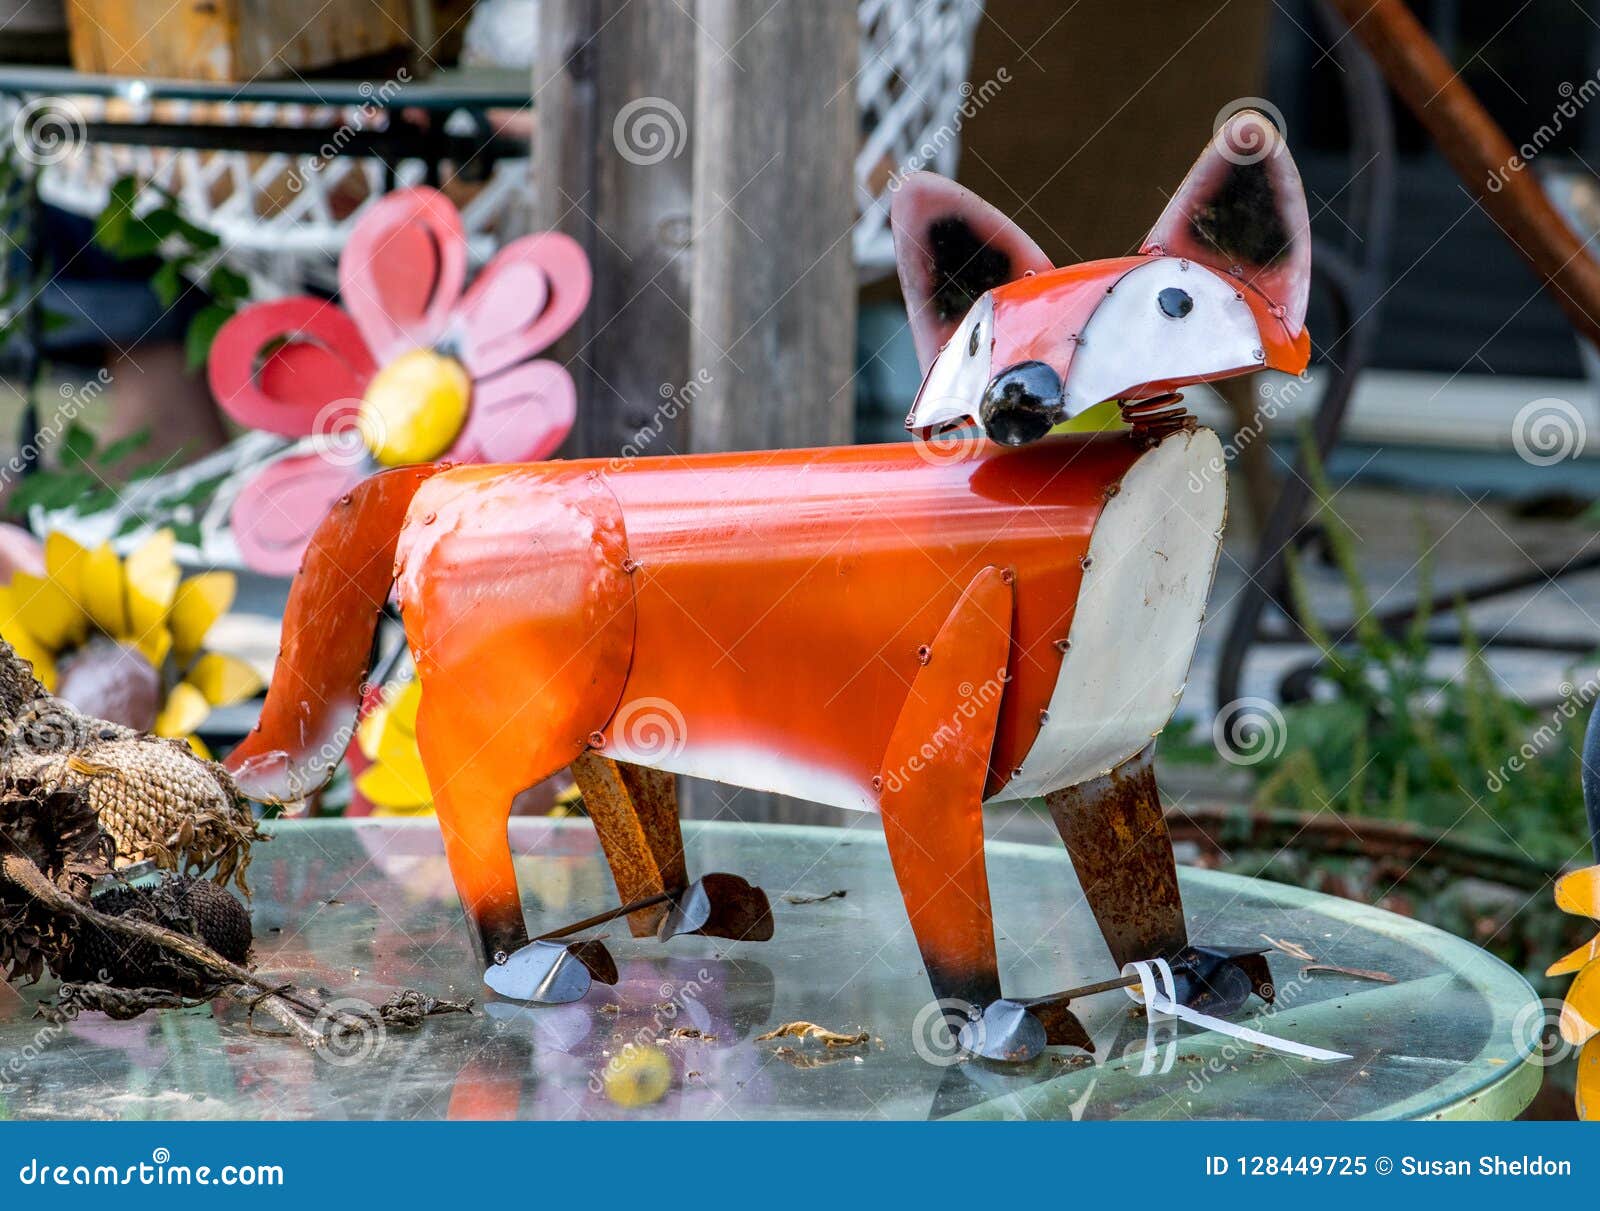 Decorative Metal Fox For A Garden Stock Image Image Of Funny